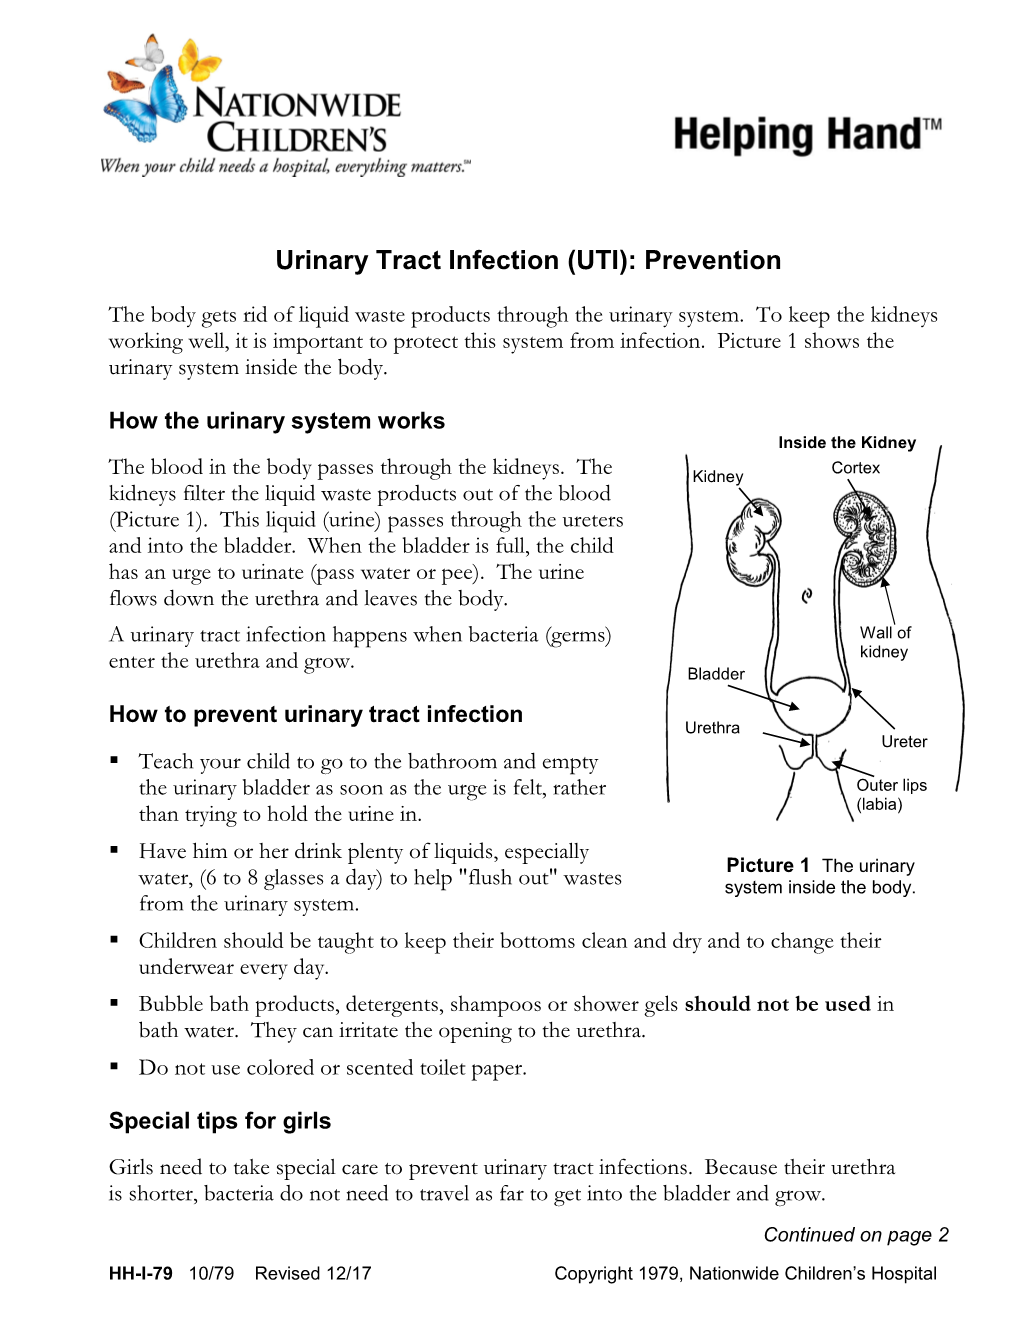 Urinary Tract Infection (UTI): Prevention